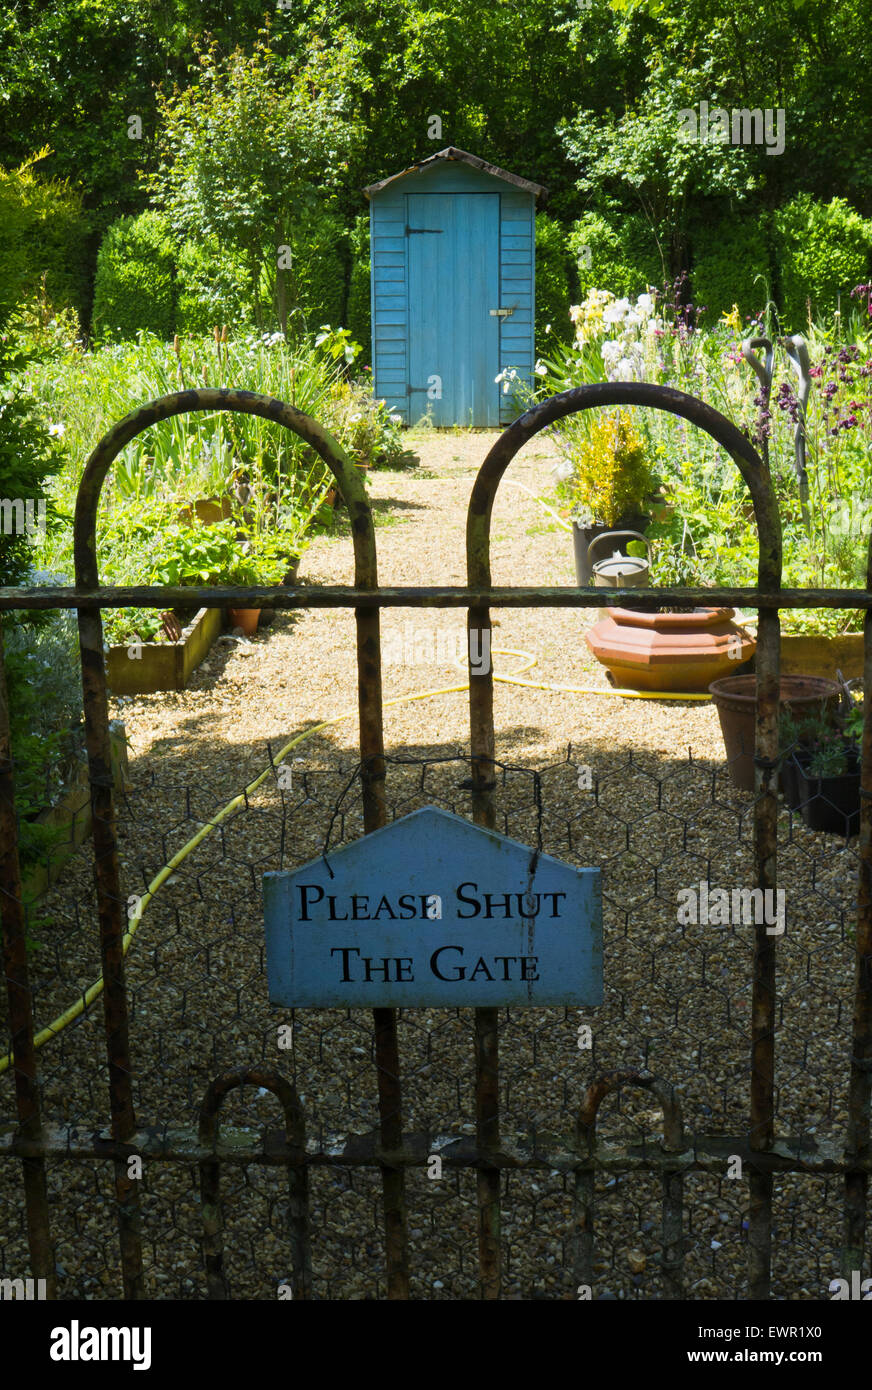 Garden gate with a sign 'PLEASE SHUT THE GATE'. Stock Photo